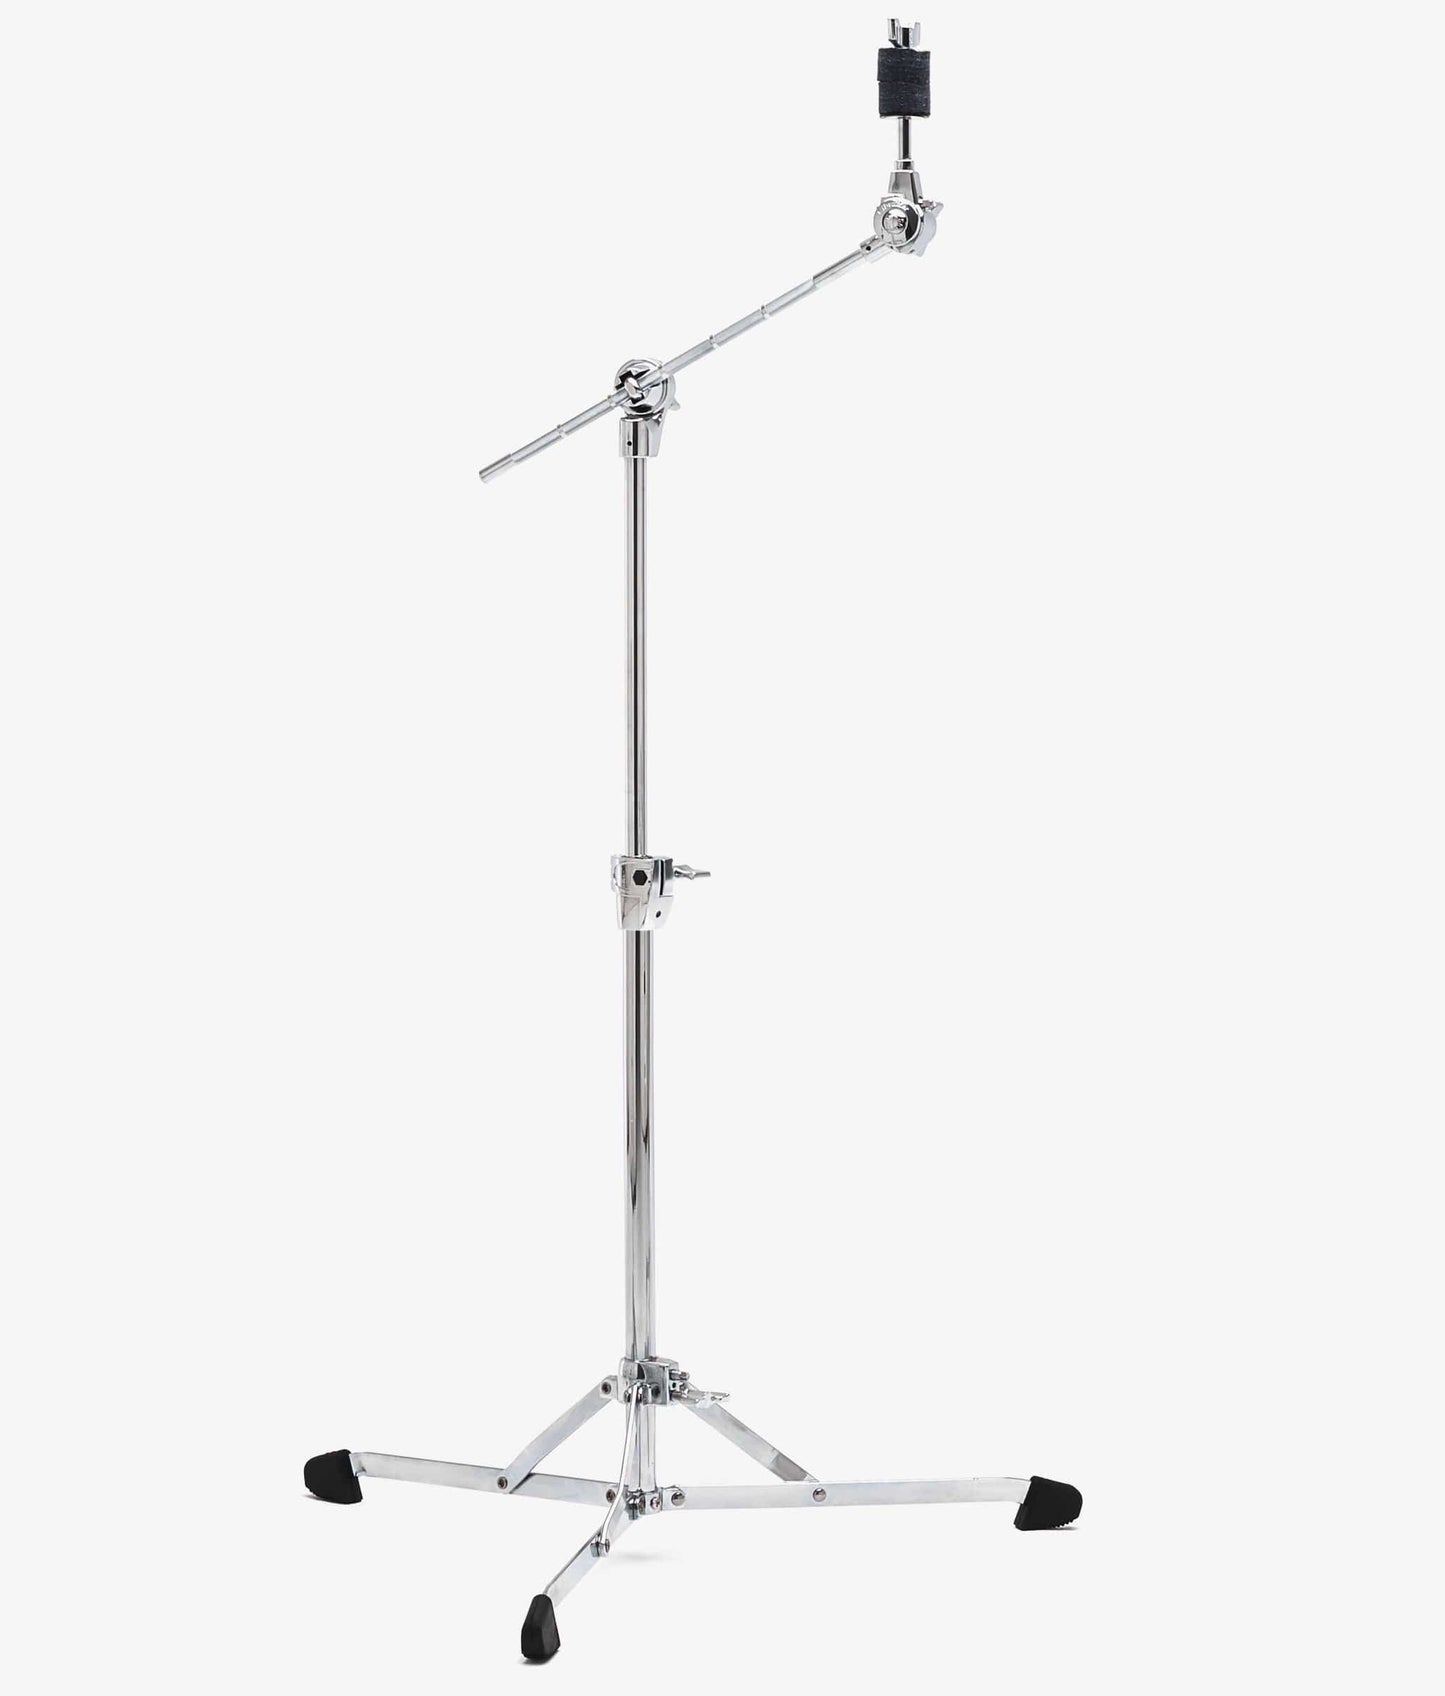  Gibraltar 8709 Flat Base Cymbal Boom Stand cymbal boom stand